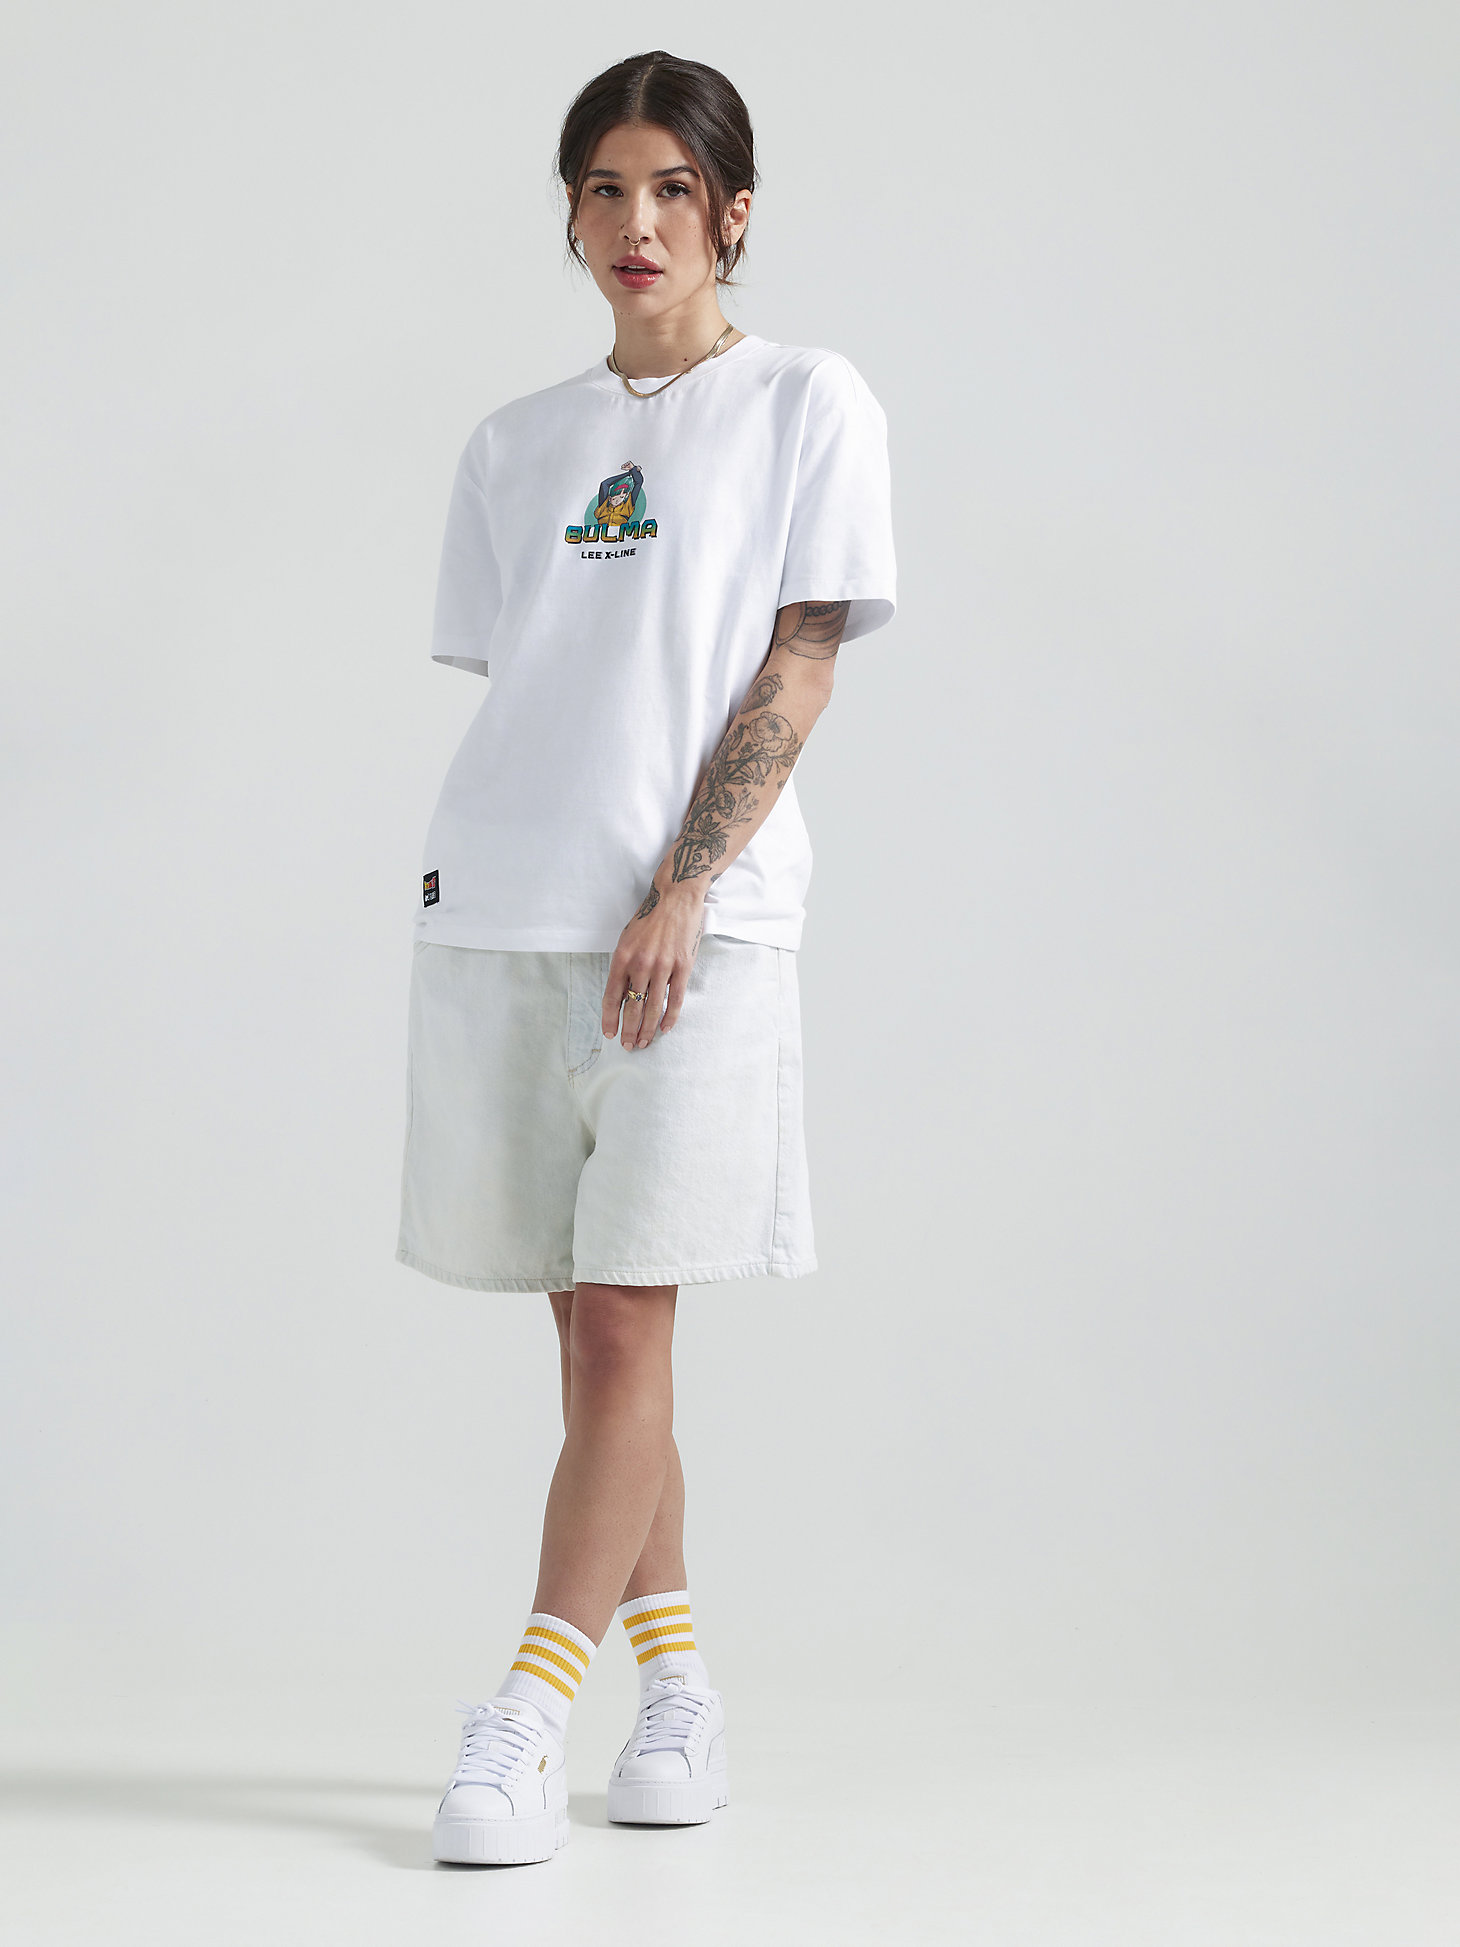 Women's Lee and Dragon Ball Z Bulma Graphic Tee in White alternative view 1